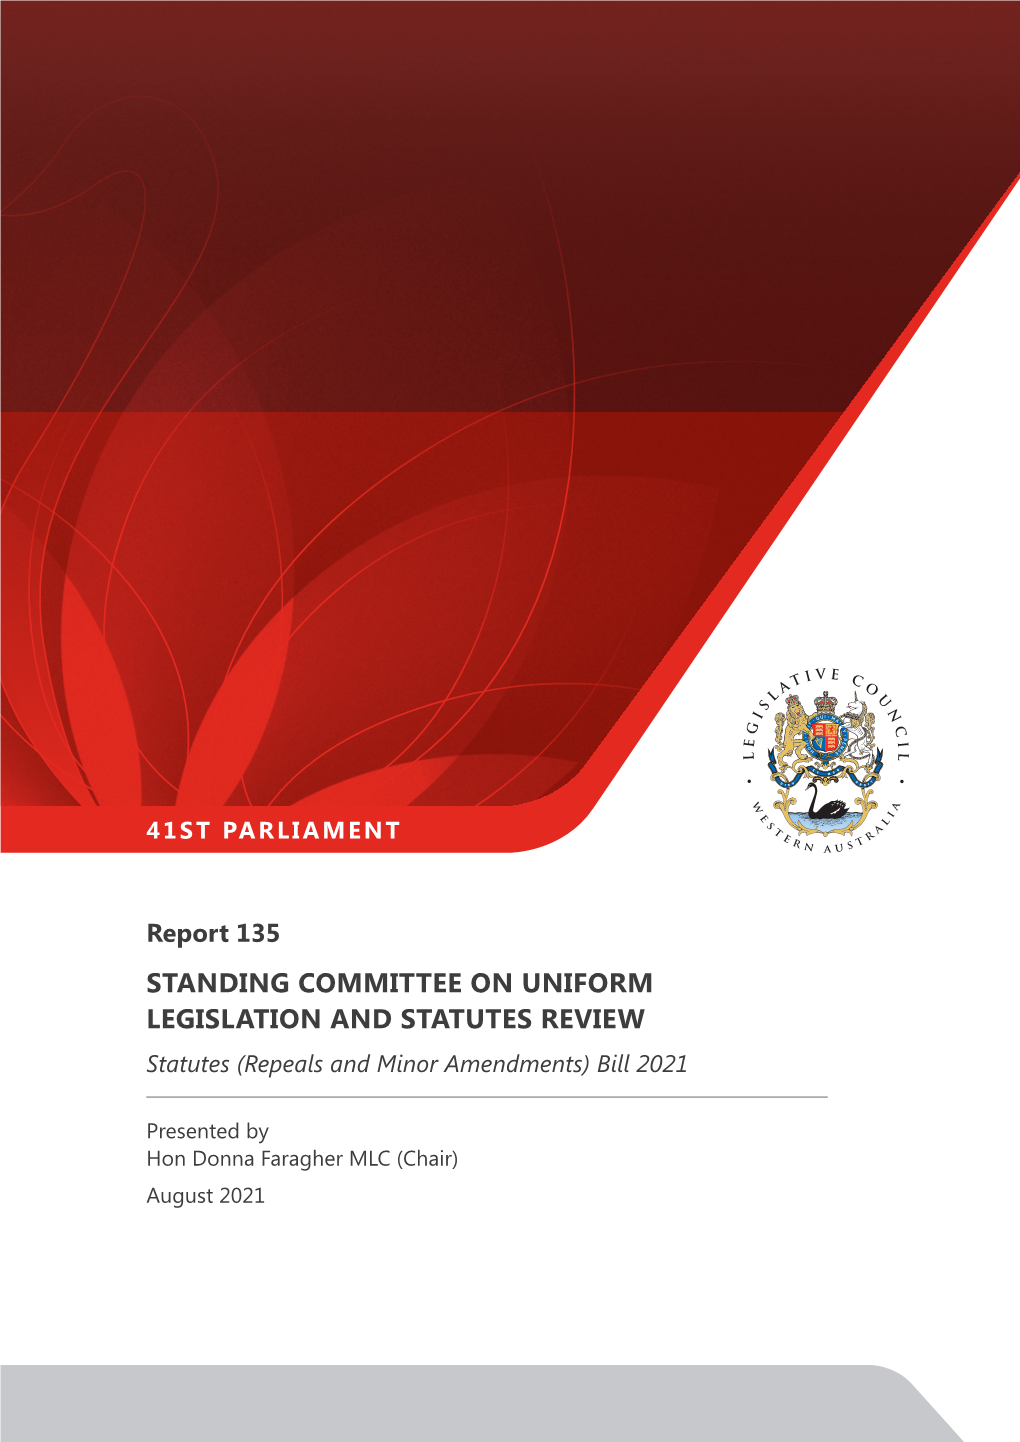 STANDING COMMITTEE on UNIFORM LEGISLATION and STATUTES REVIEW Statutes (Repeals and Minor Amendments) Bill 2021